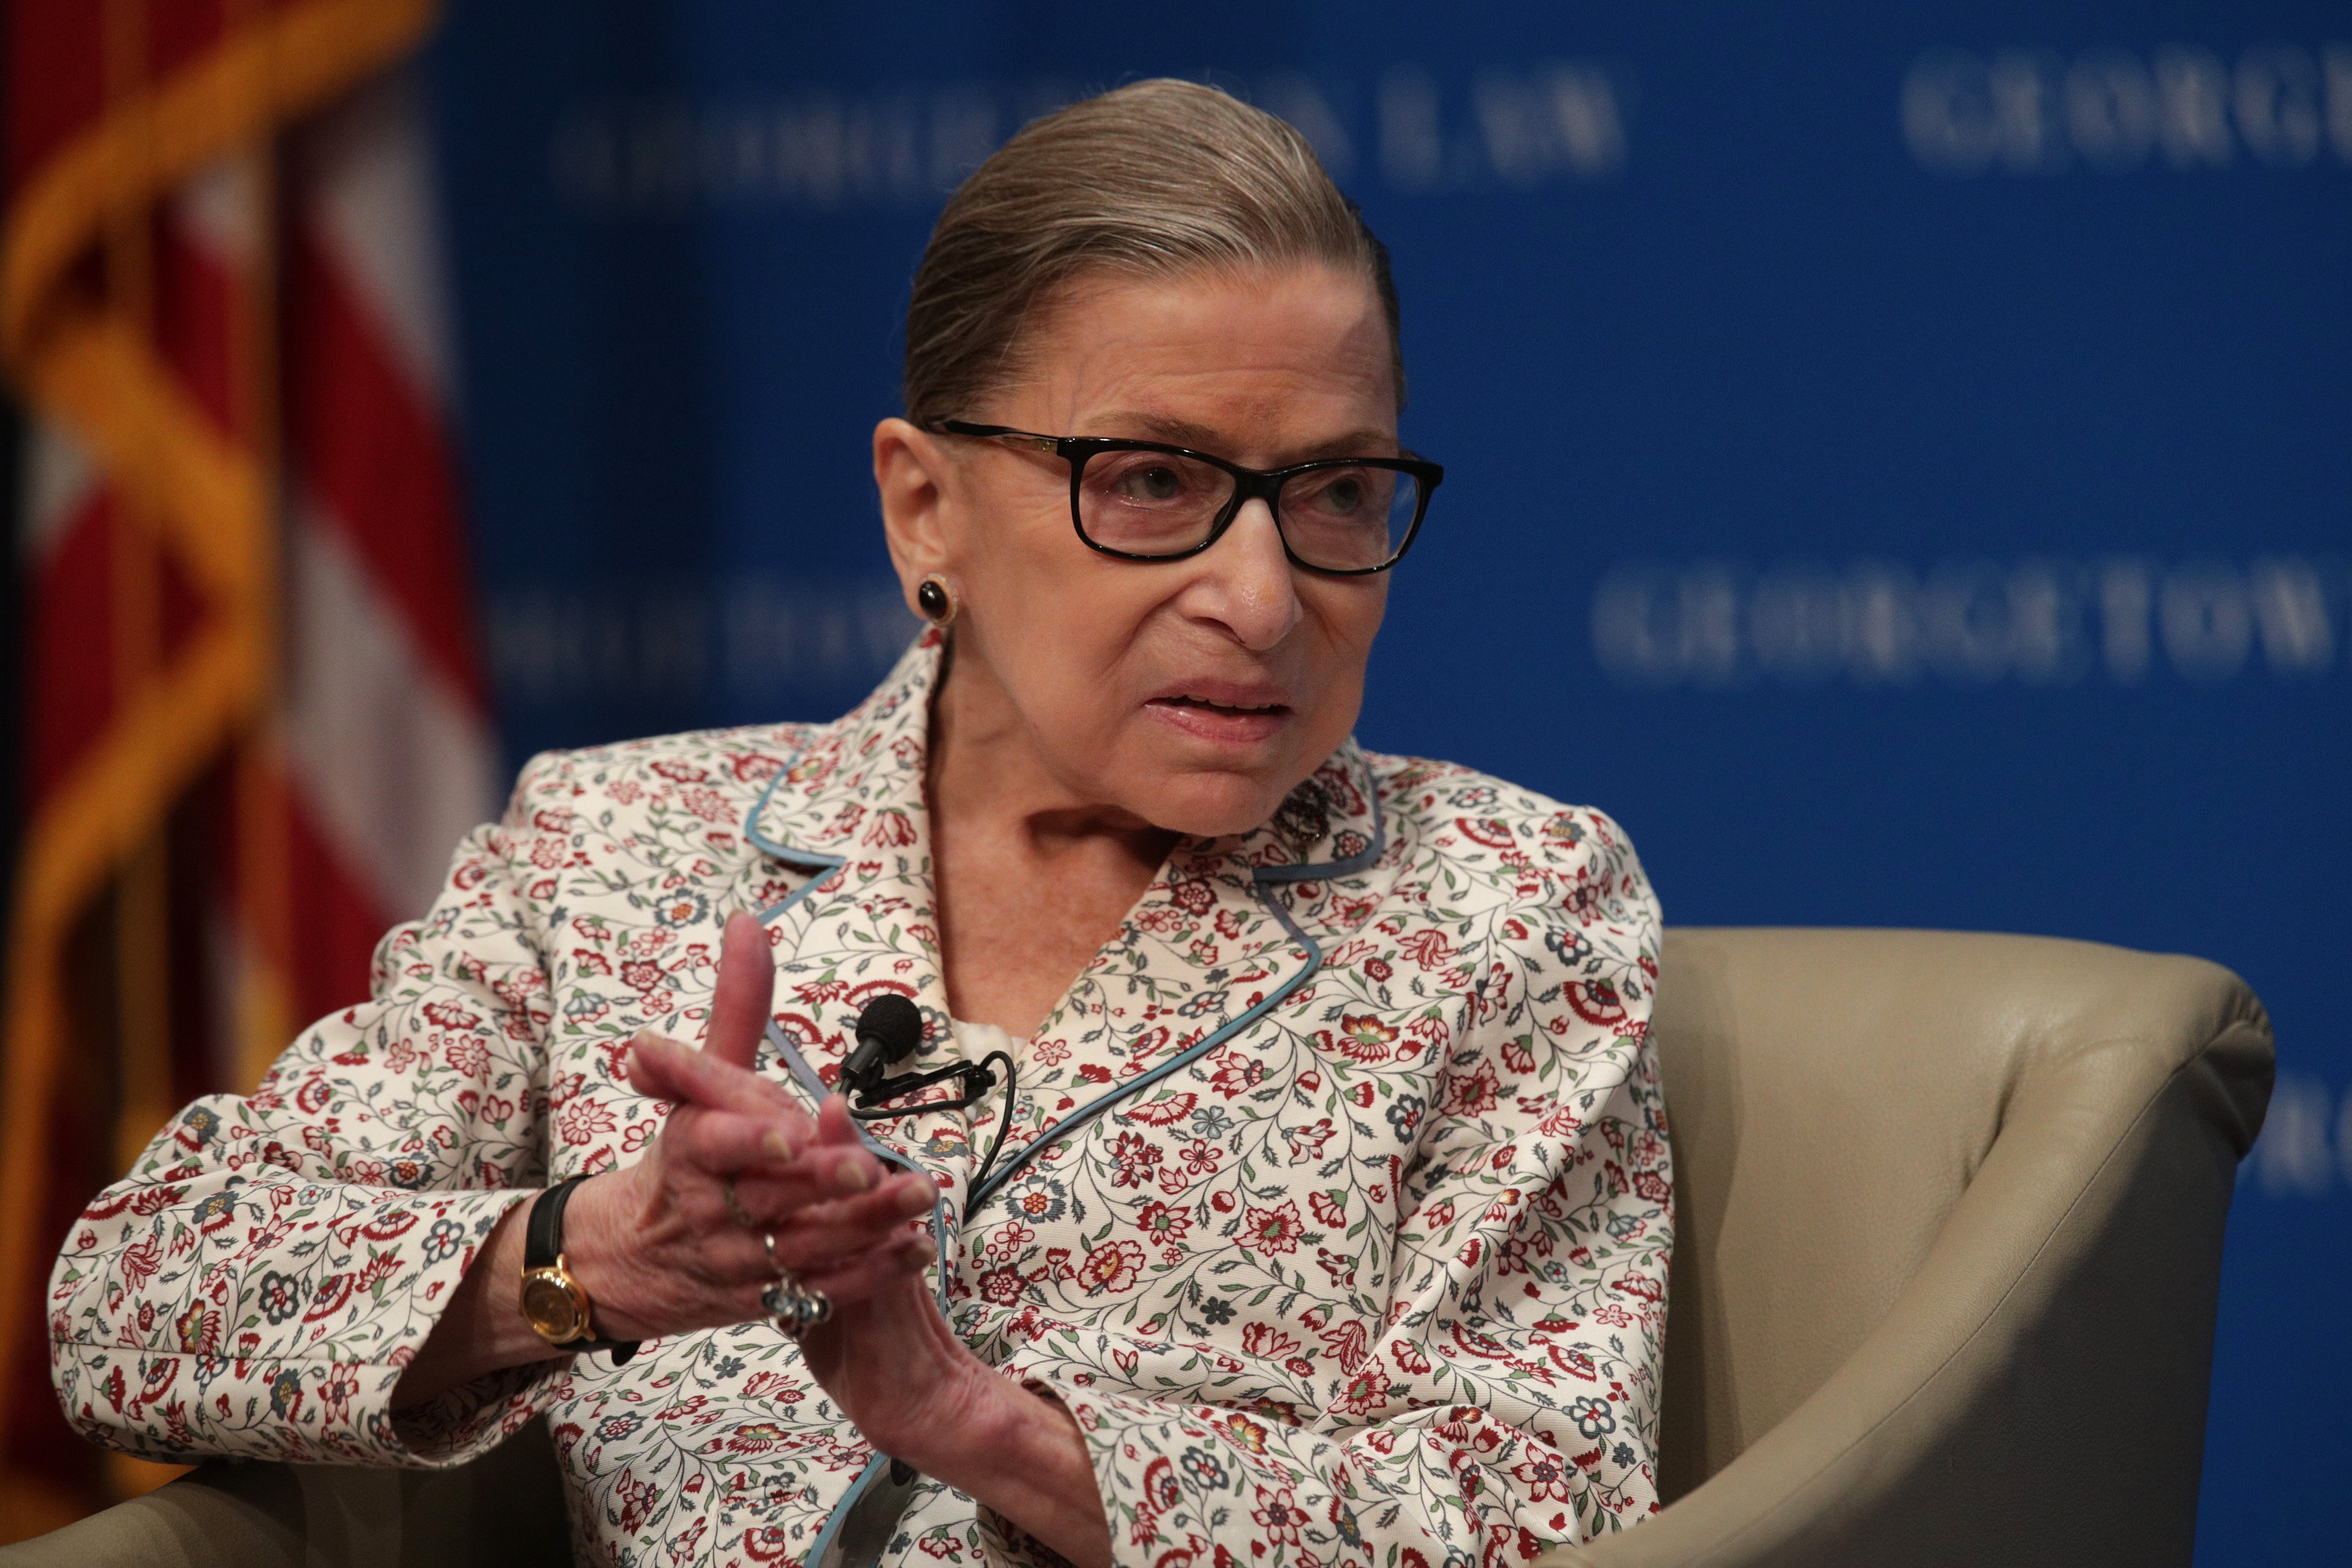 Supreme Court Associate Justice Ruth Bader Ginsburg participates in a discussion at Georgetown University Law Center July 2, 2019 | Photo: Getty Images